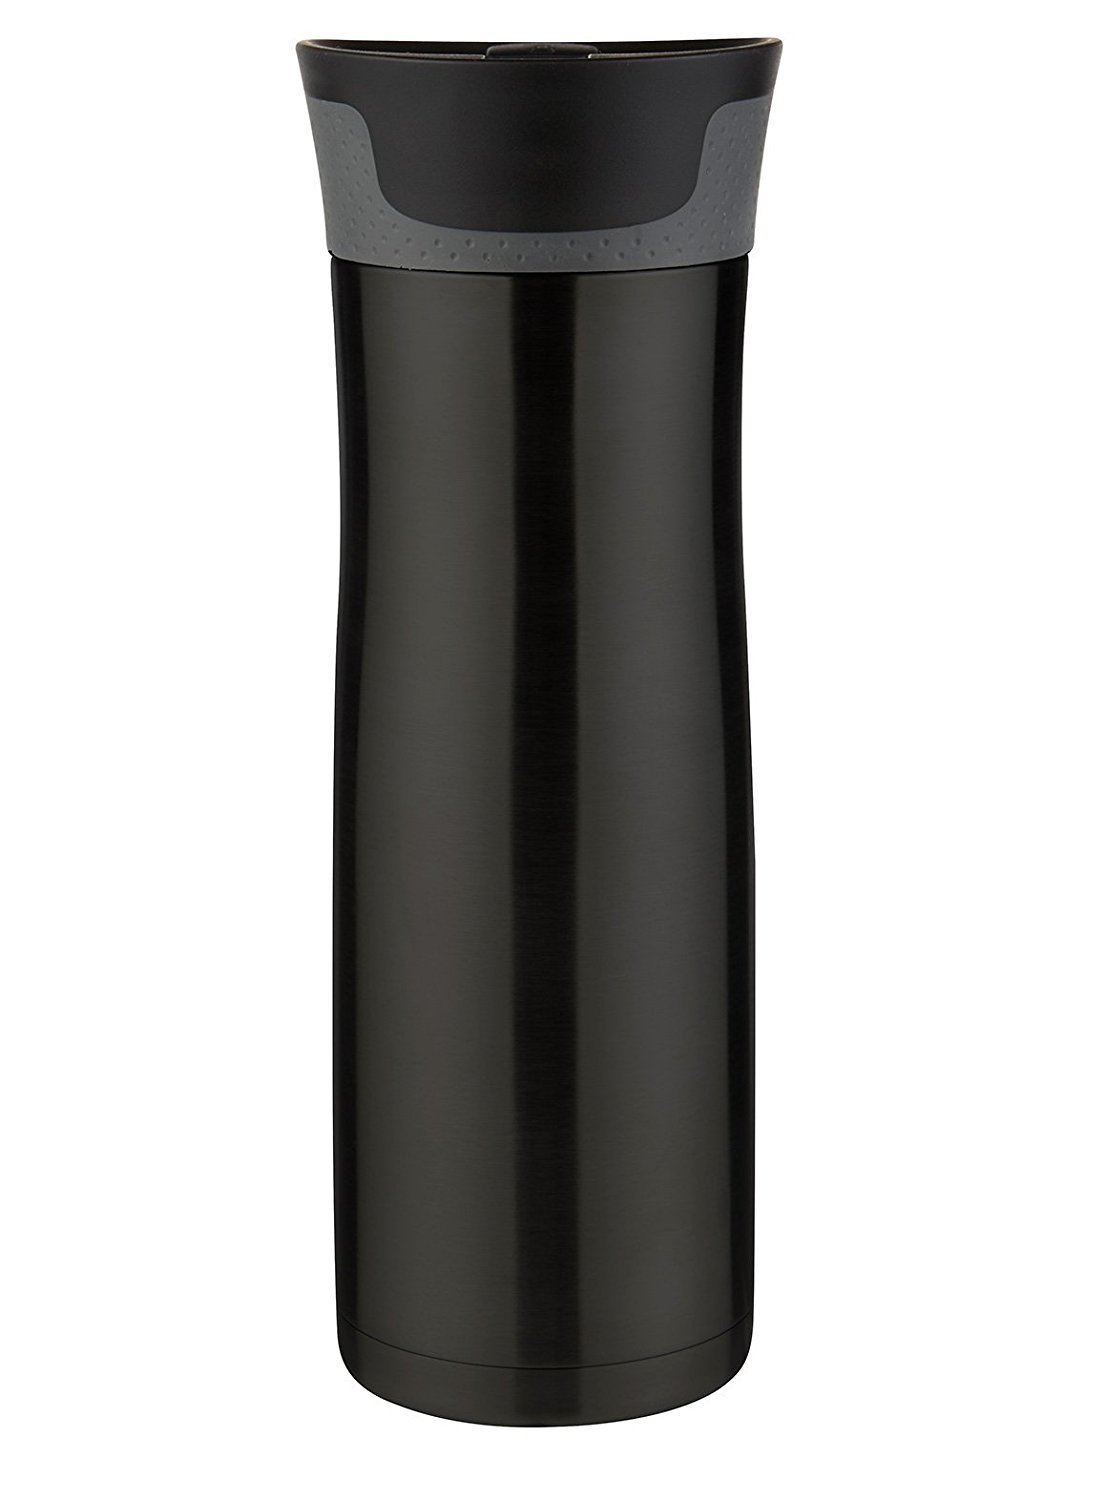 Contigo West Loop Stainless Steel Tumbler with AUTOSEAL lid